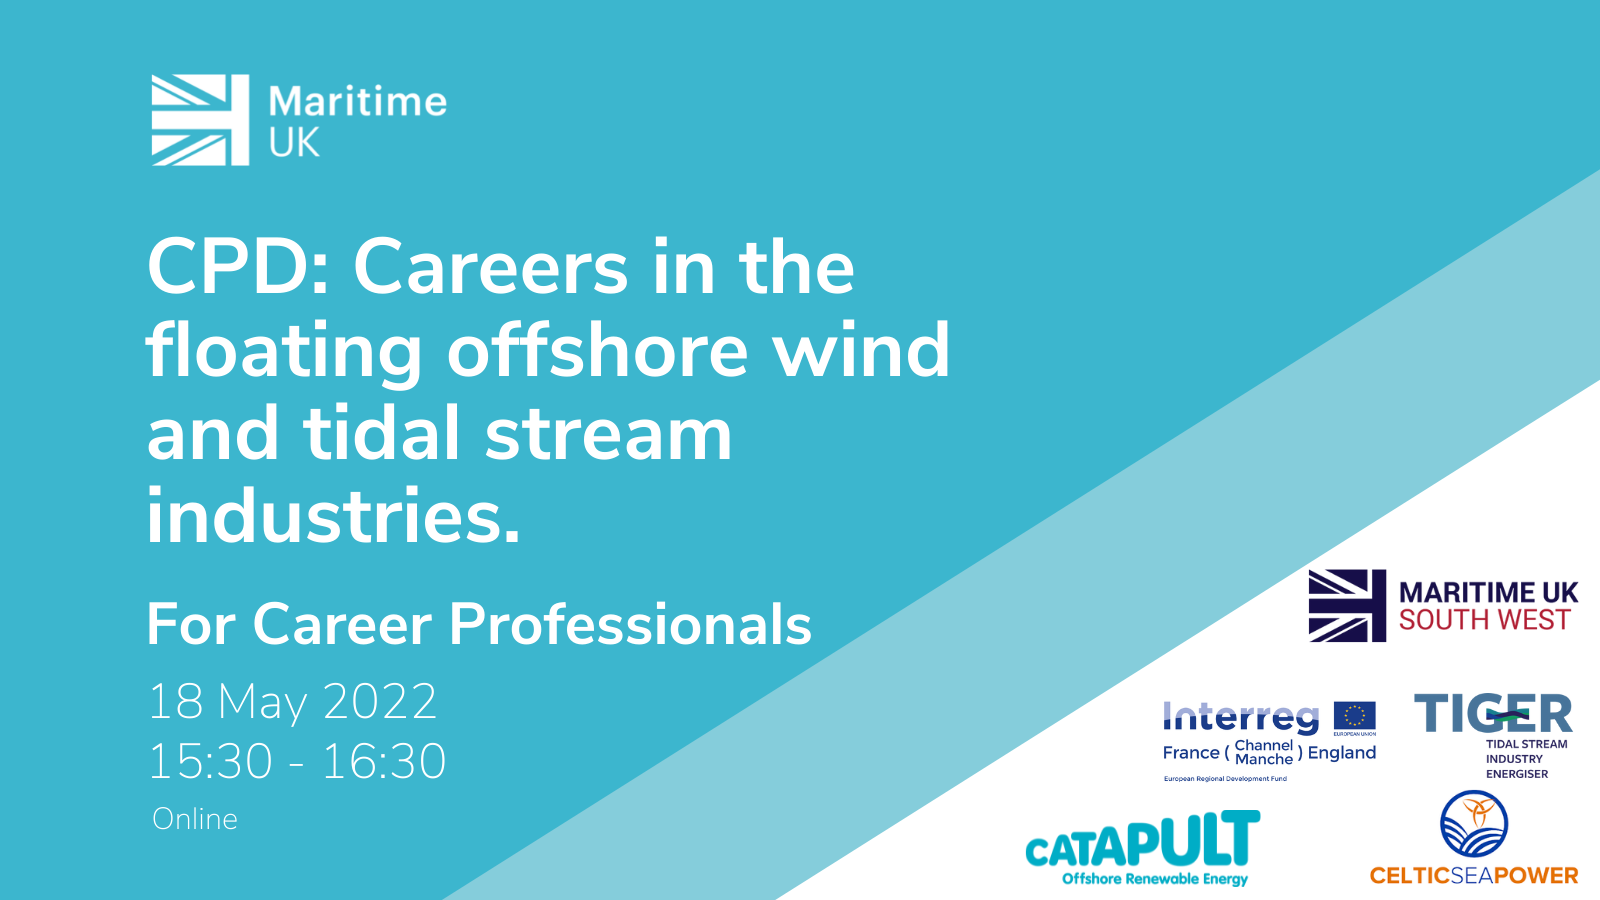 CPD Offshore Wind and Wave Careers - MUK SW